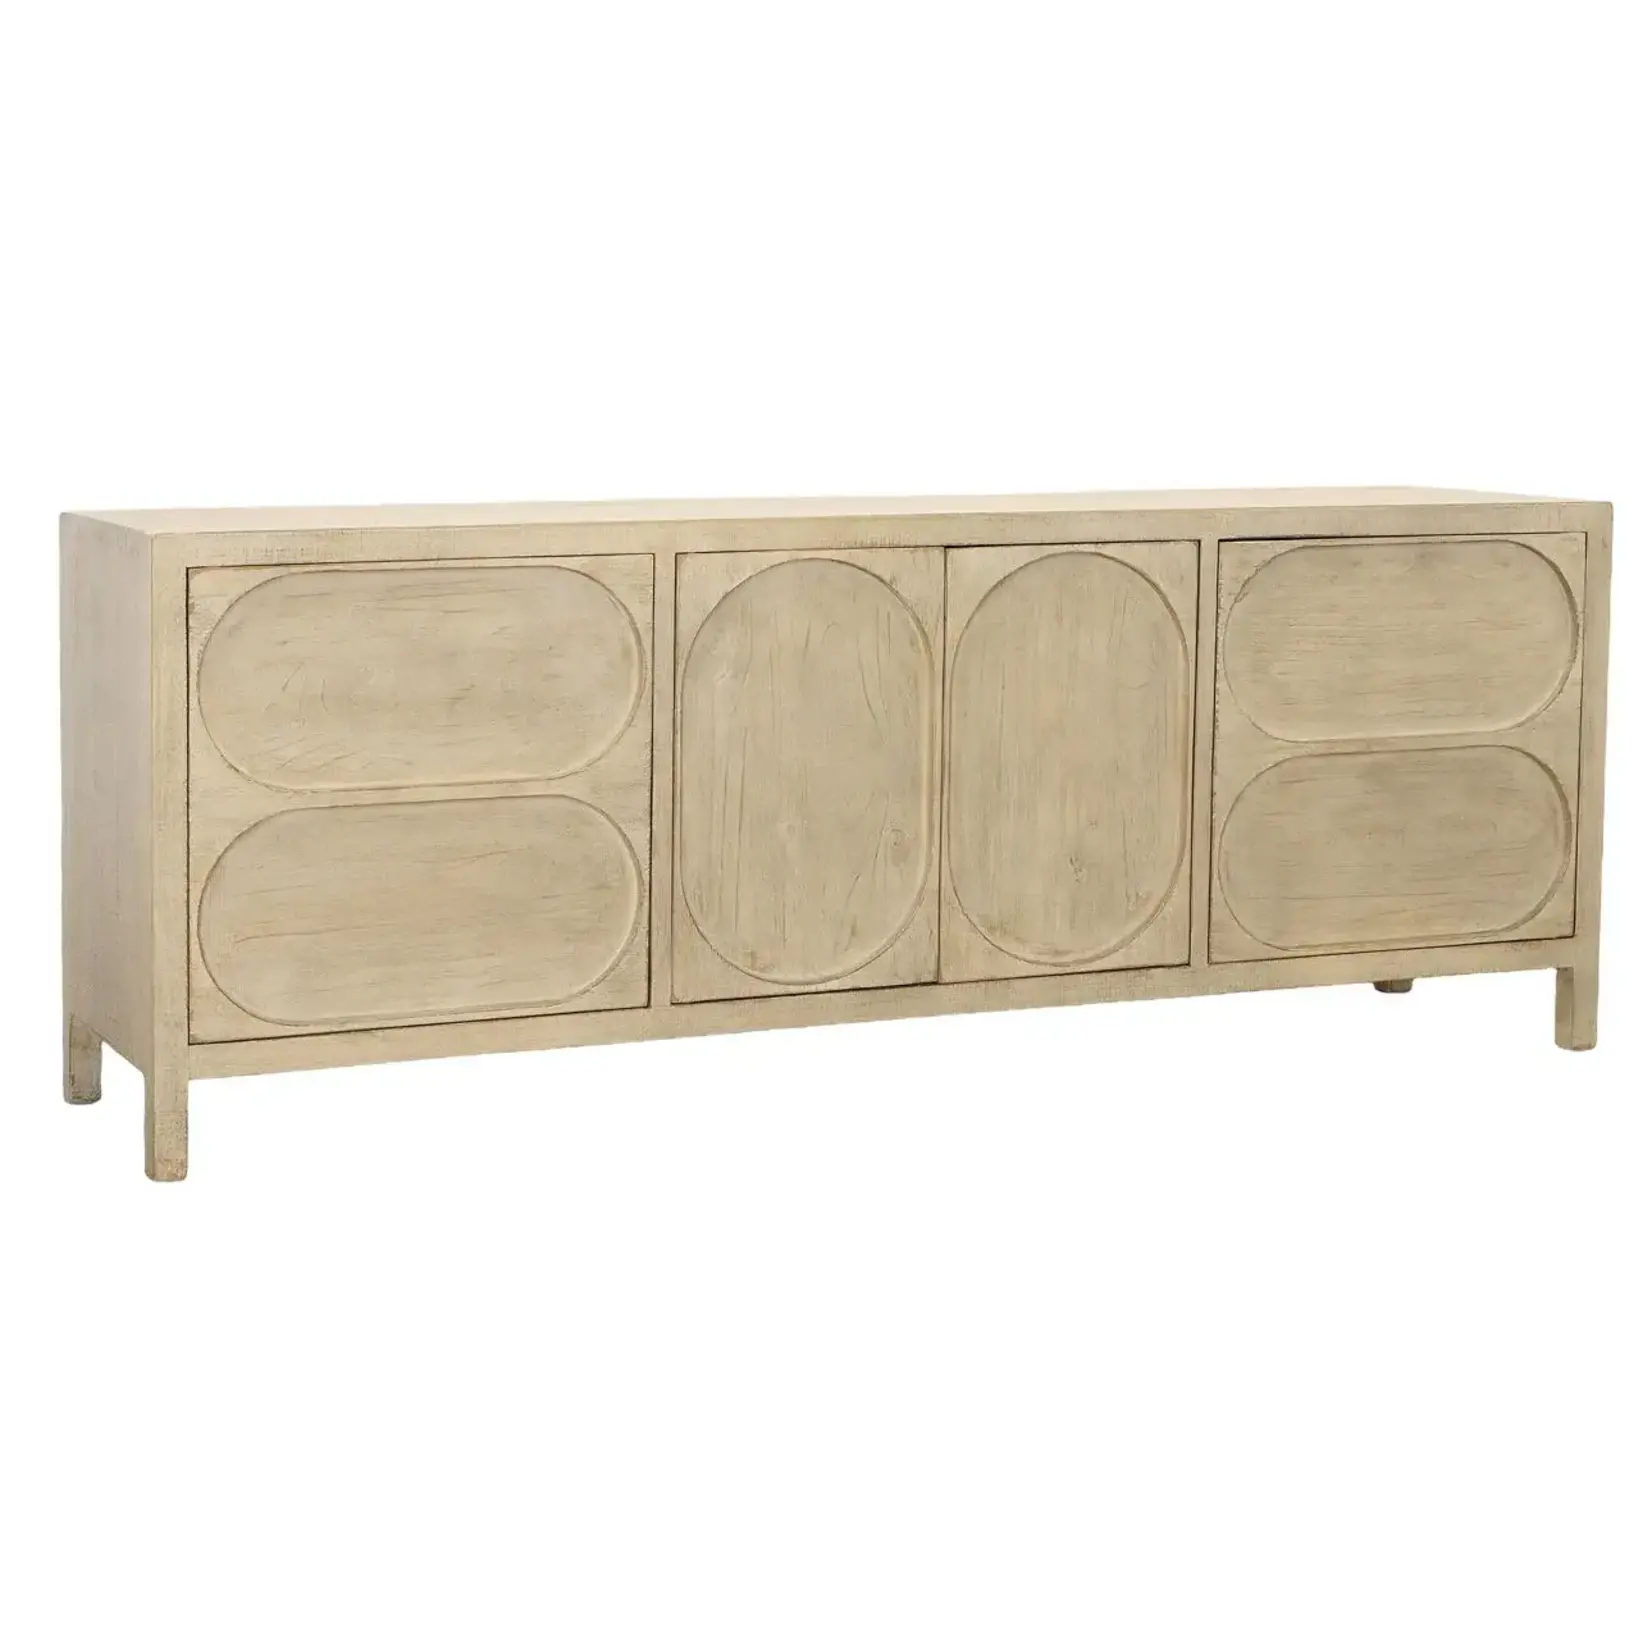 Outside The Box 78x18x30 Abaco Light Warm Wash Reclaimed Pine 4 Door Sideboard